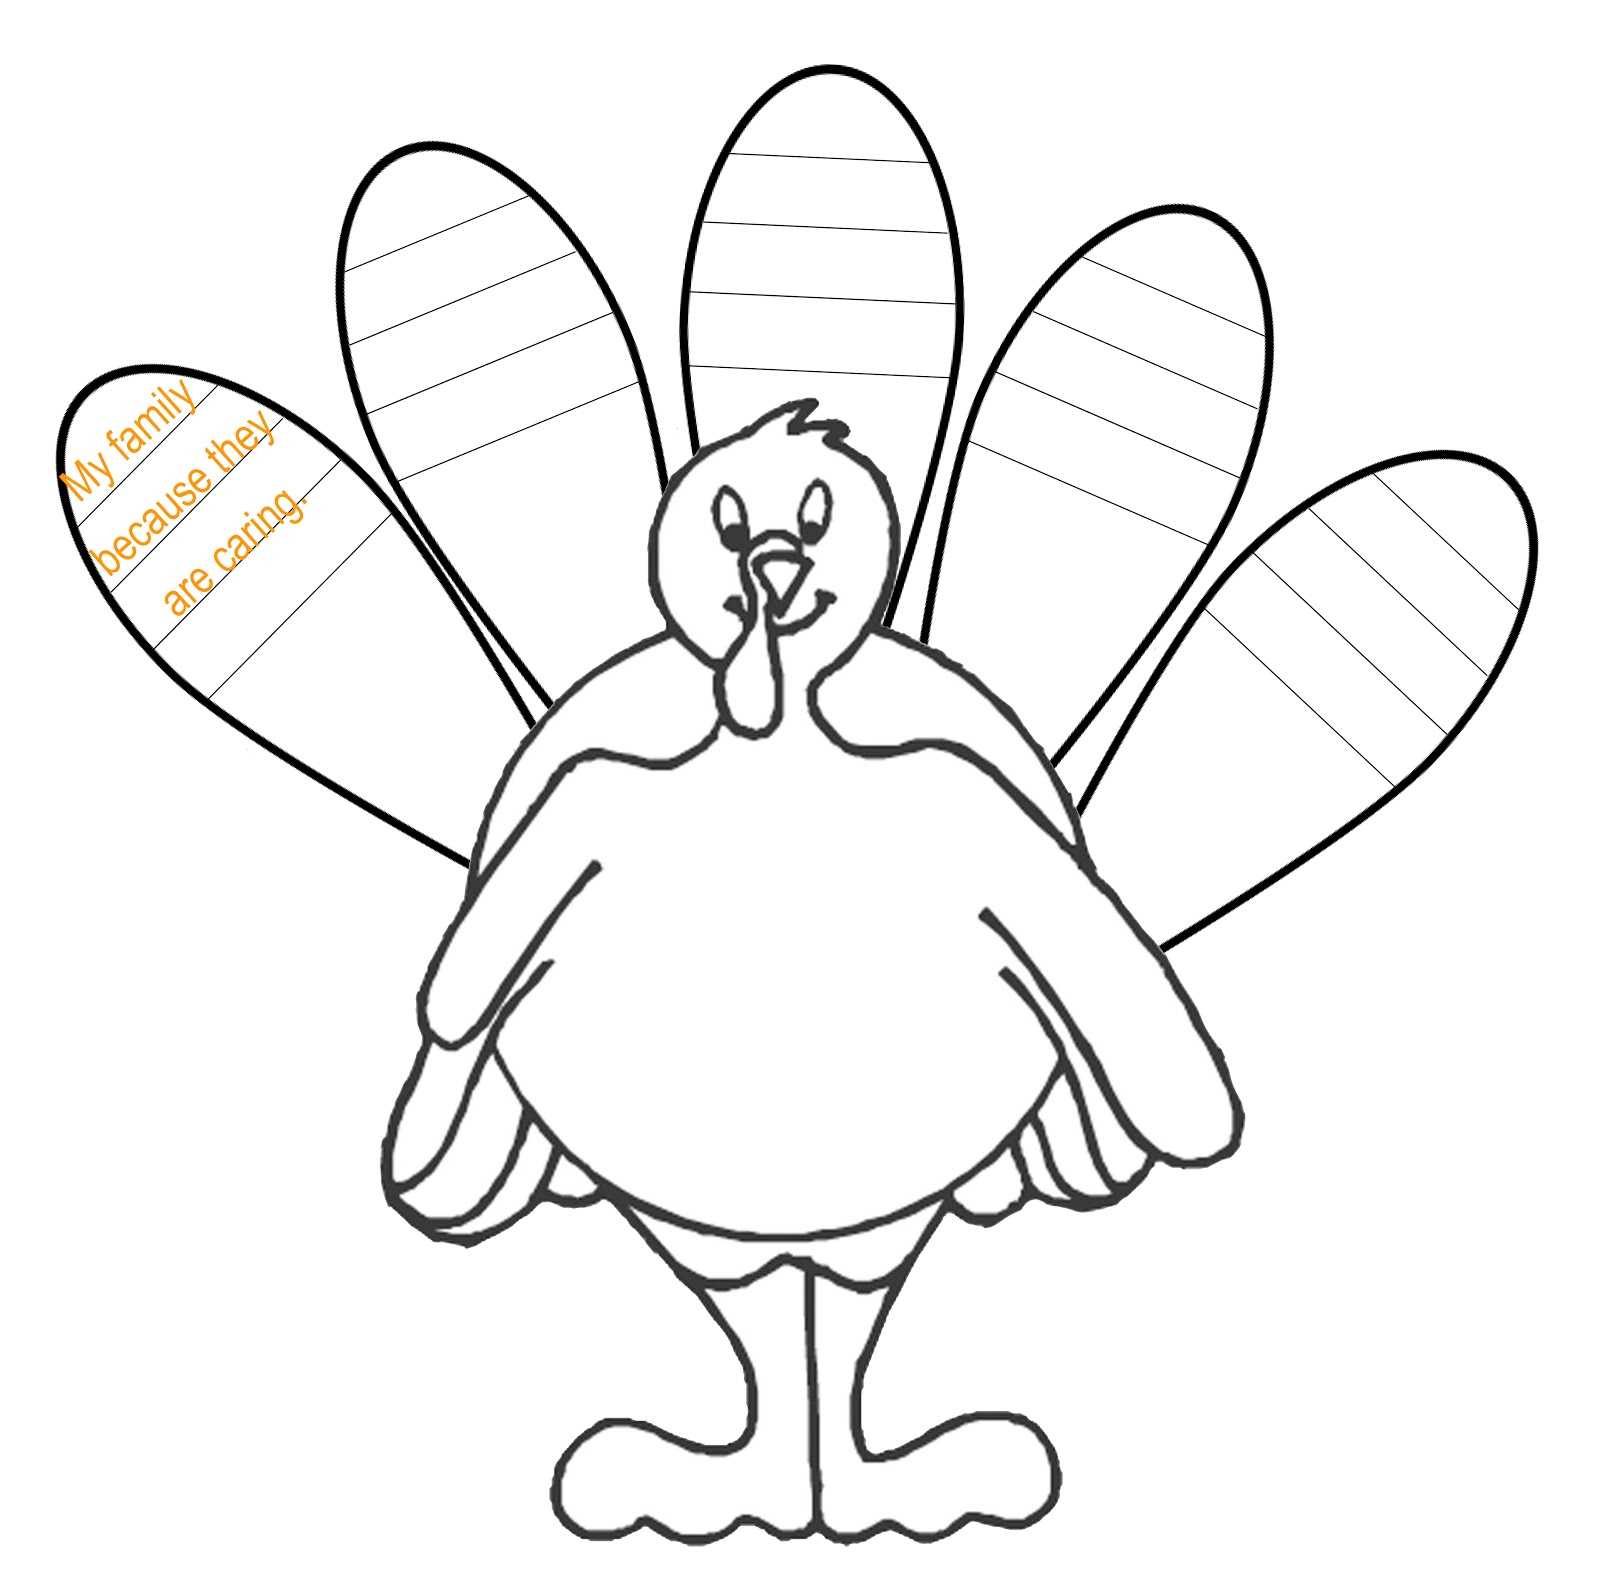 Turkey Clip Art Coloring Page, Picture #4554 Turkey Clip Art For Blank Turkey Template